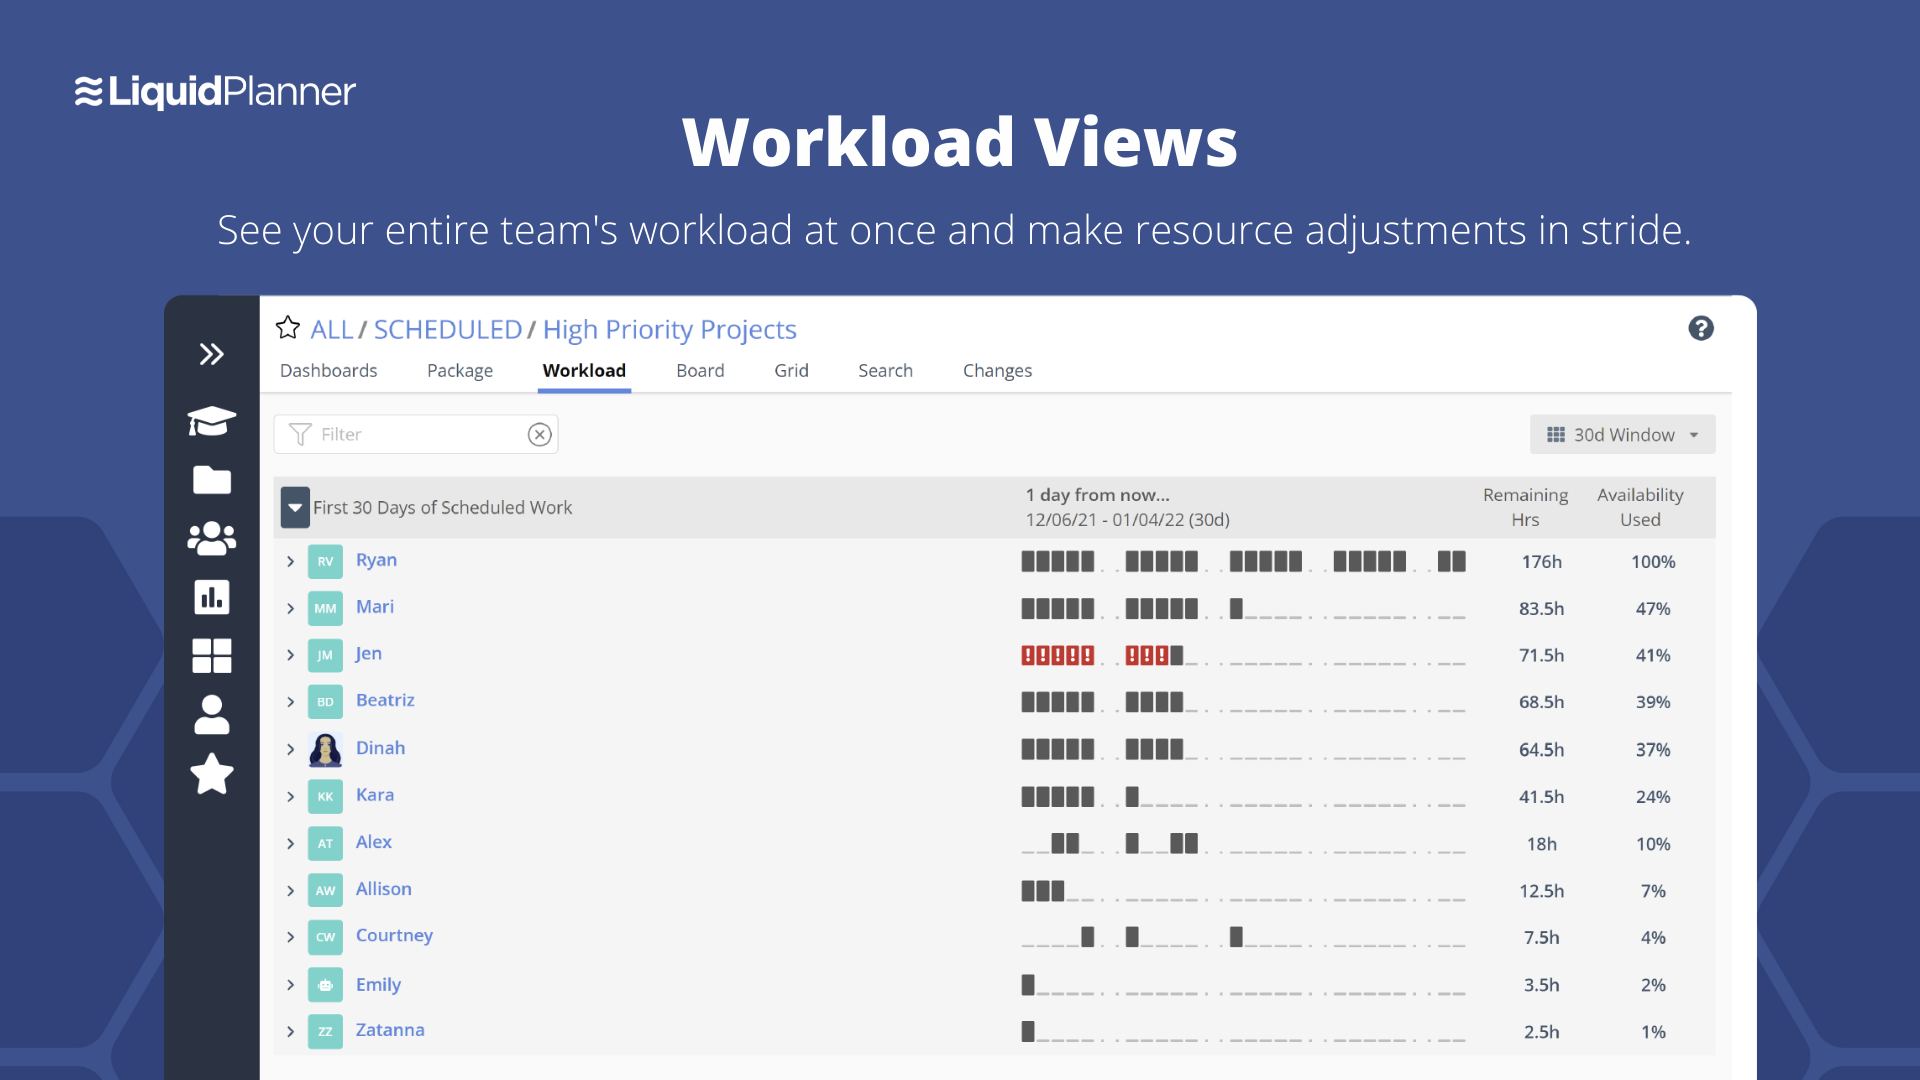 LiquidPlanner - Workload Views allow you to see your entire team's workload at once and make resource adjustments in stride.